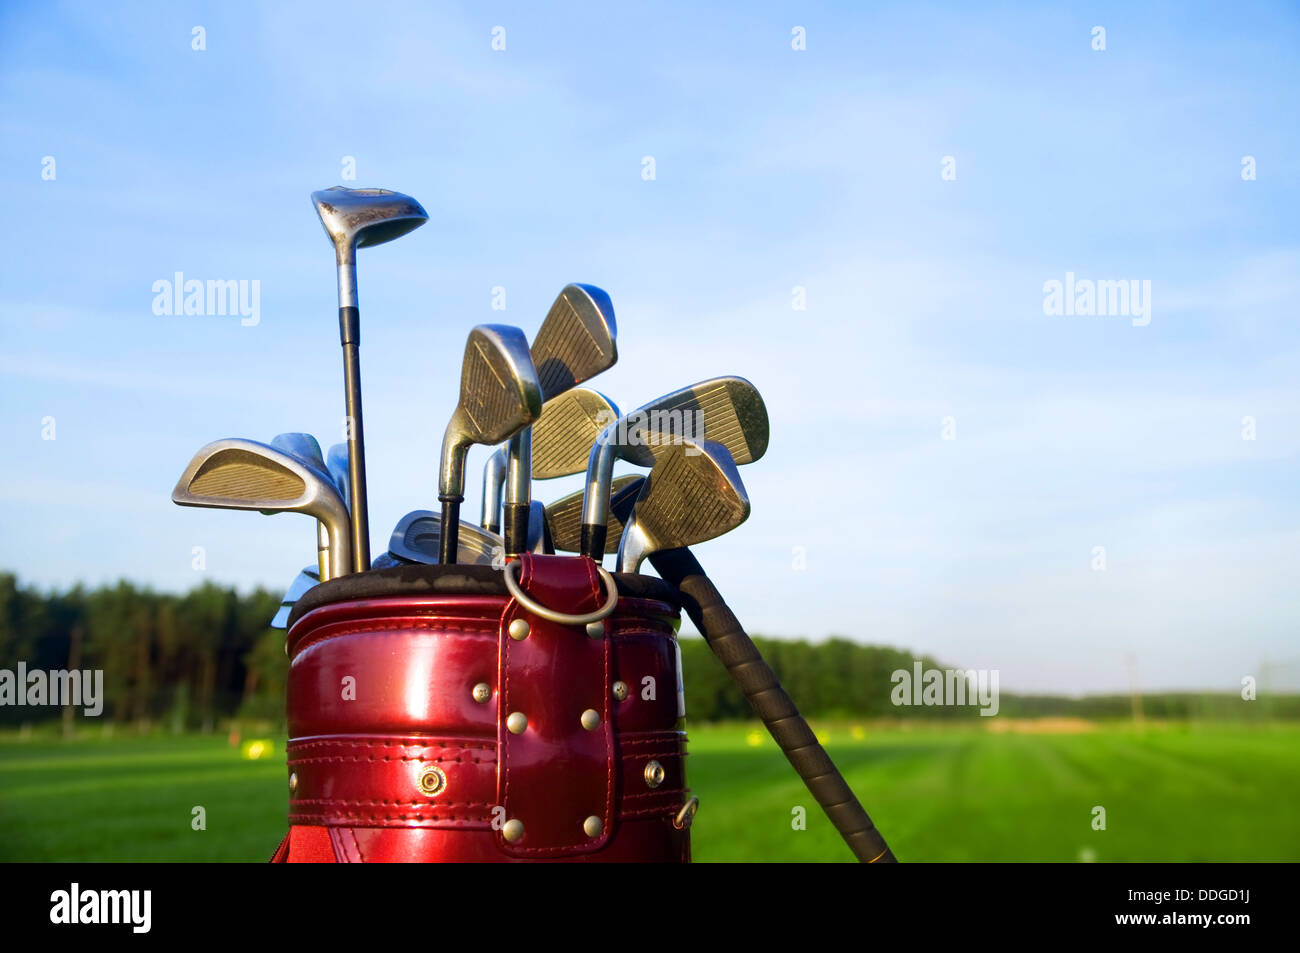 Professional golf clubs in a golf bag on a course. Stock Photo